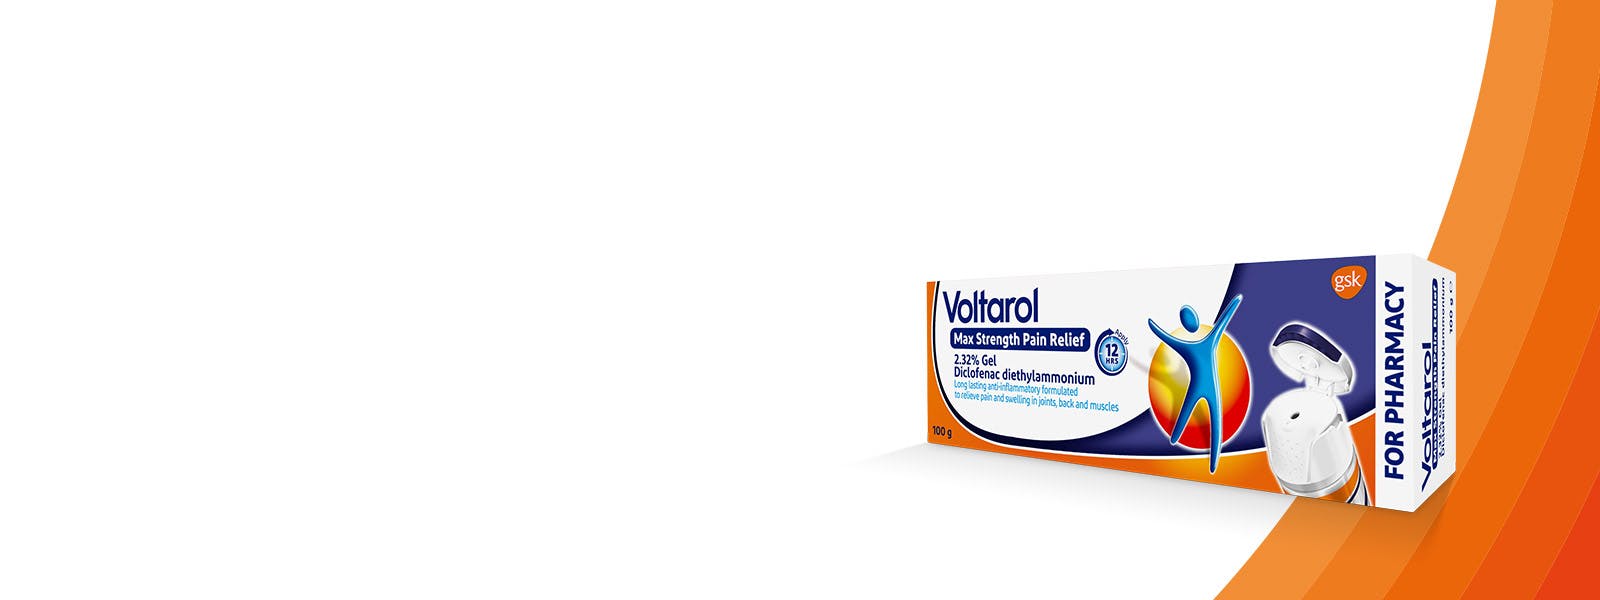 Voltarol 2.32% Diclofenac Gel for joint and back pain relief product